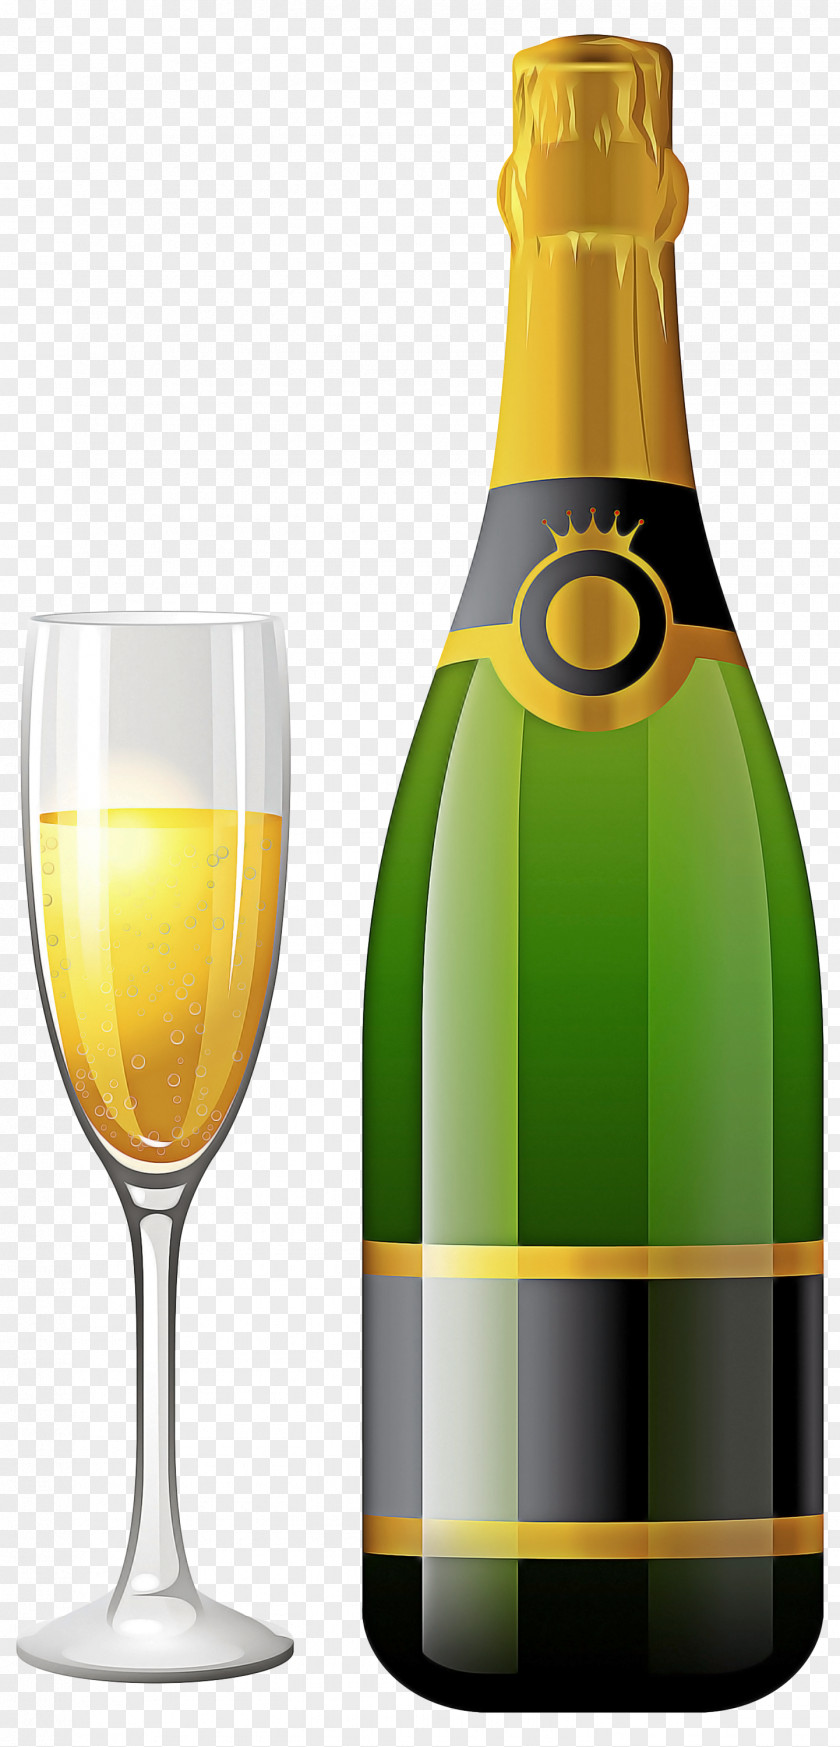 Liquid Prosecco Champagne Bottle PNG